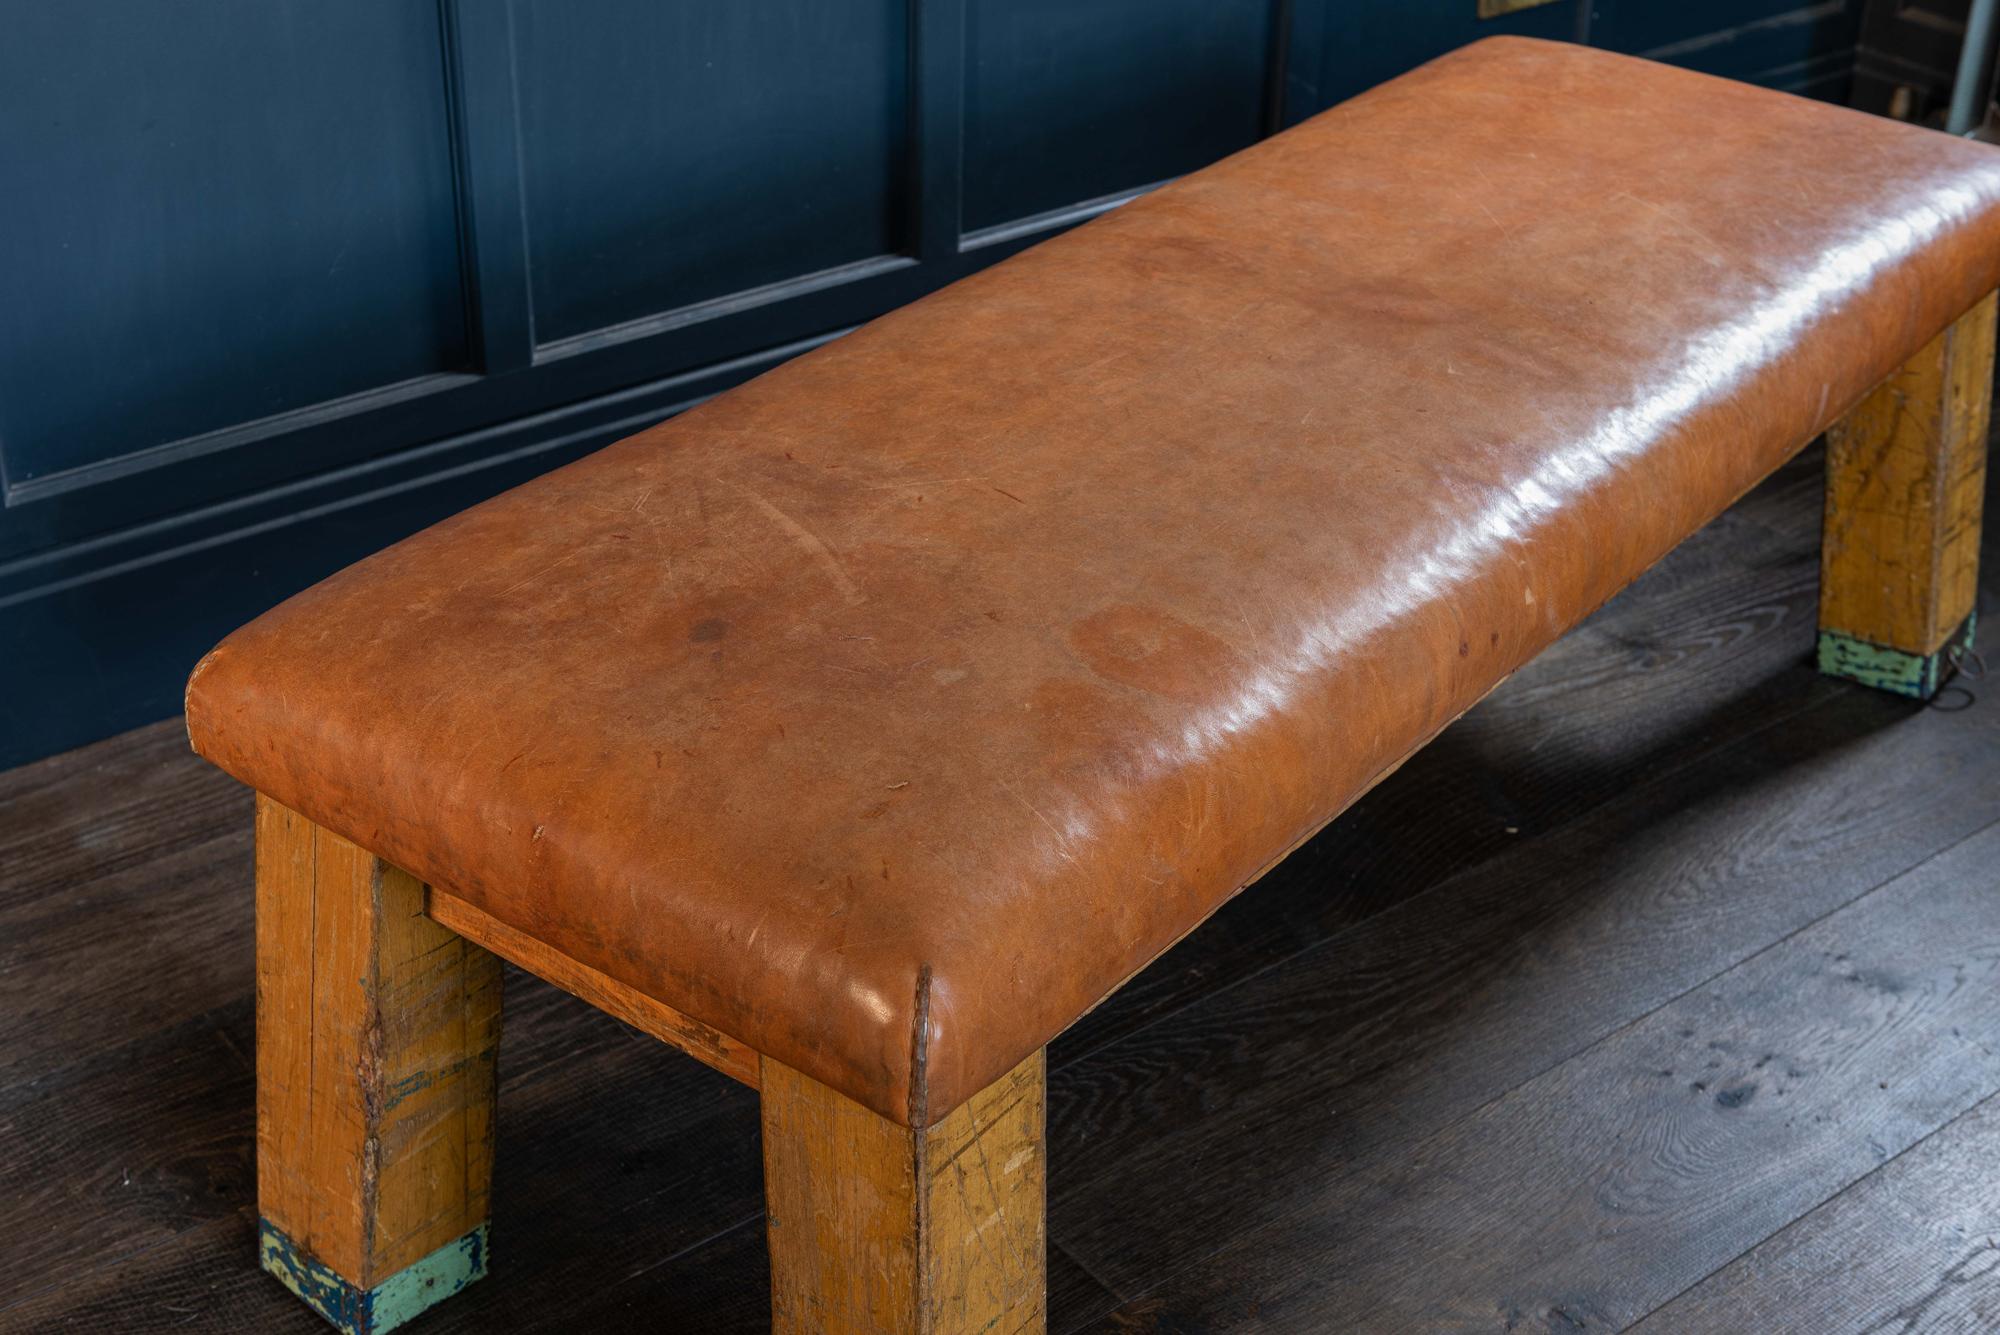 English beech vaulting bench/coffee table in cognac leather, early 20th century.
A versatile robust piece of furniture that can be used as seating, for dining or as a coffee table.
Each leg is capped with an iron strap and hoop.

Measures: W